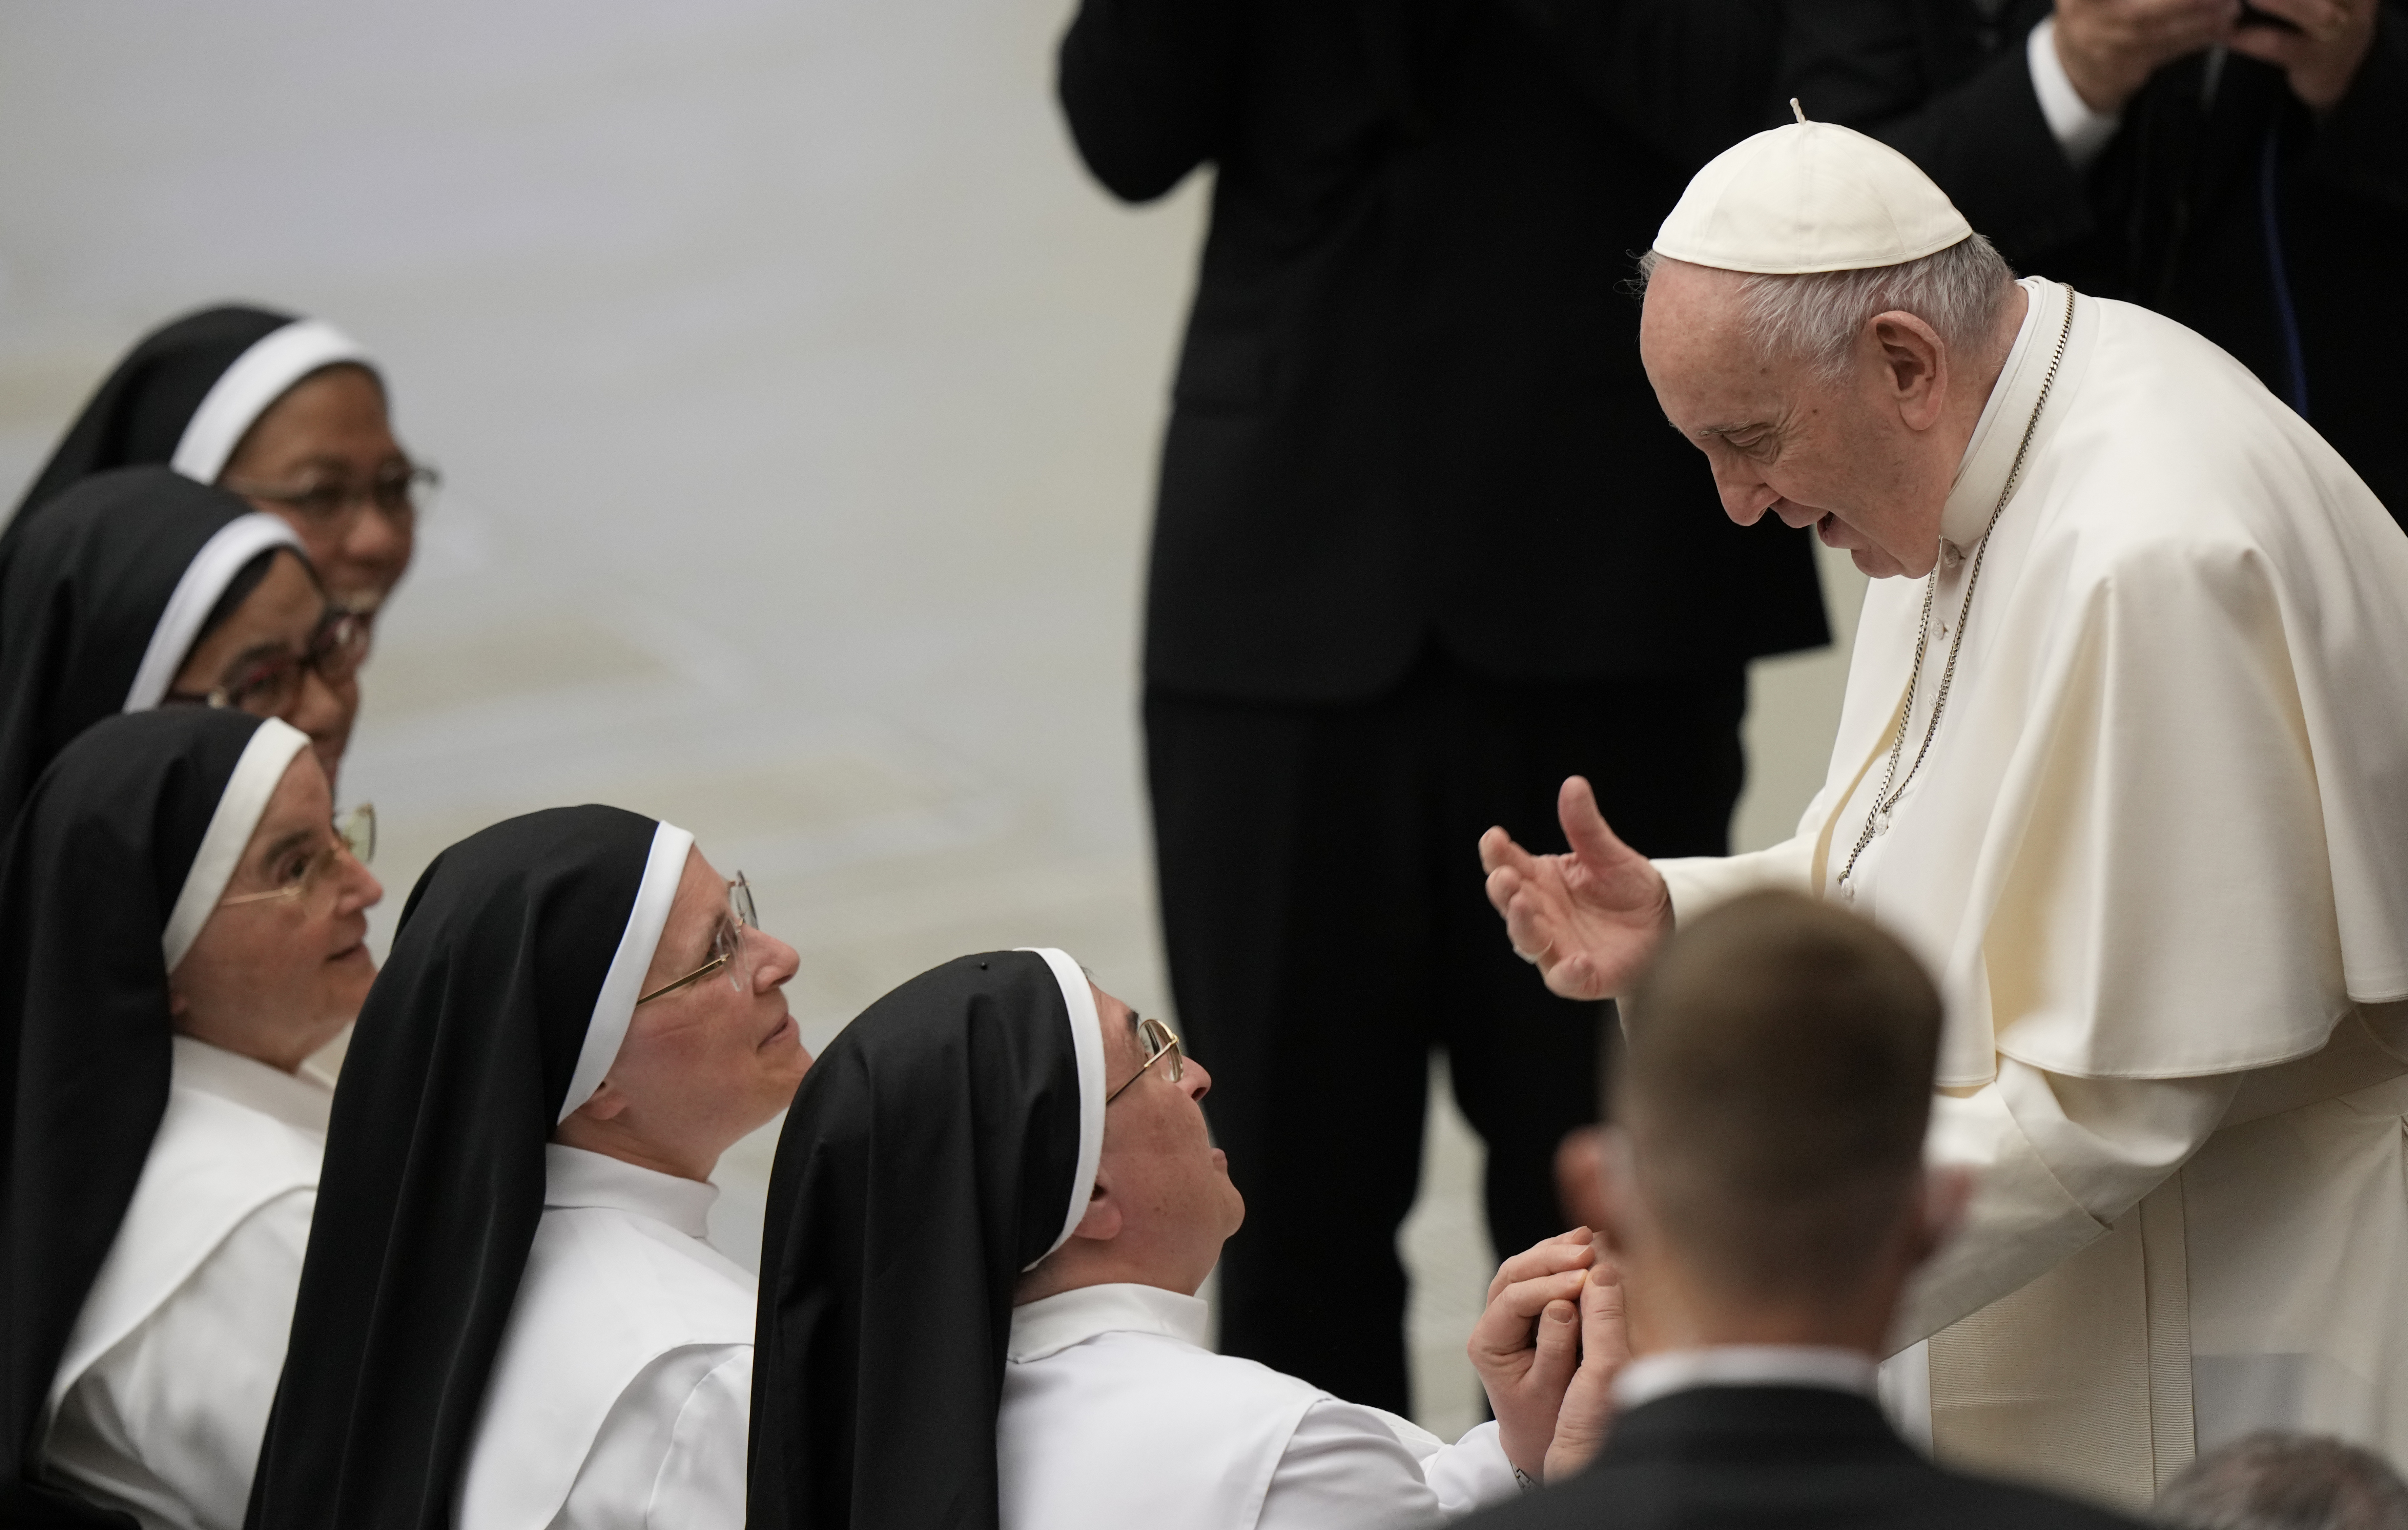 Pope Francis greets nuns at the end of his weekly general audience in the Paul VI Hall at The Vatican, Wednesday, March 30, 2022. (AP Photo/Andrew Medichini)